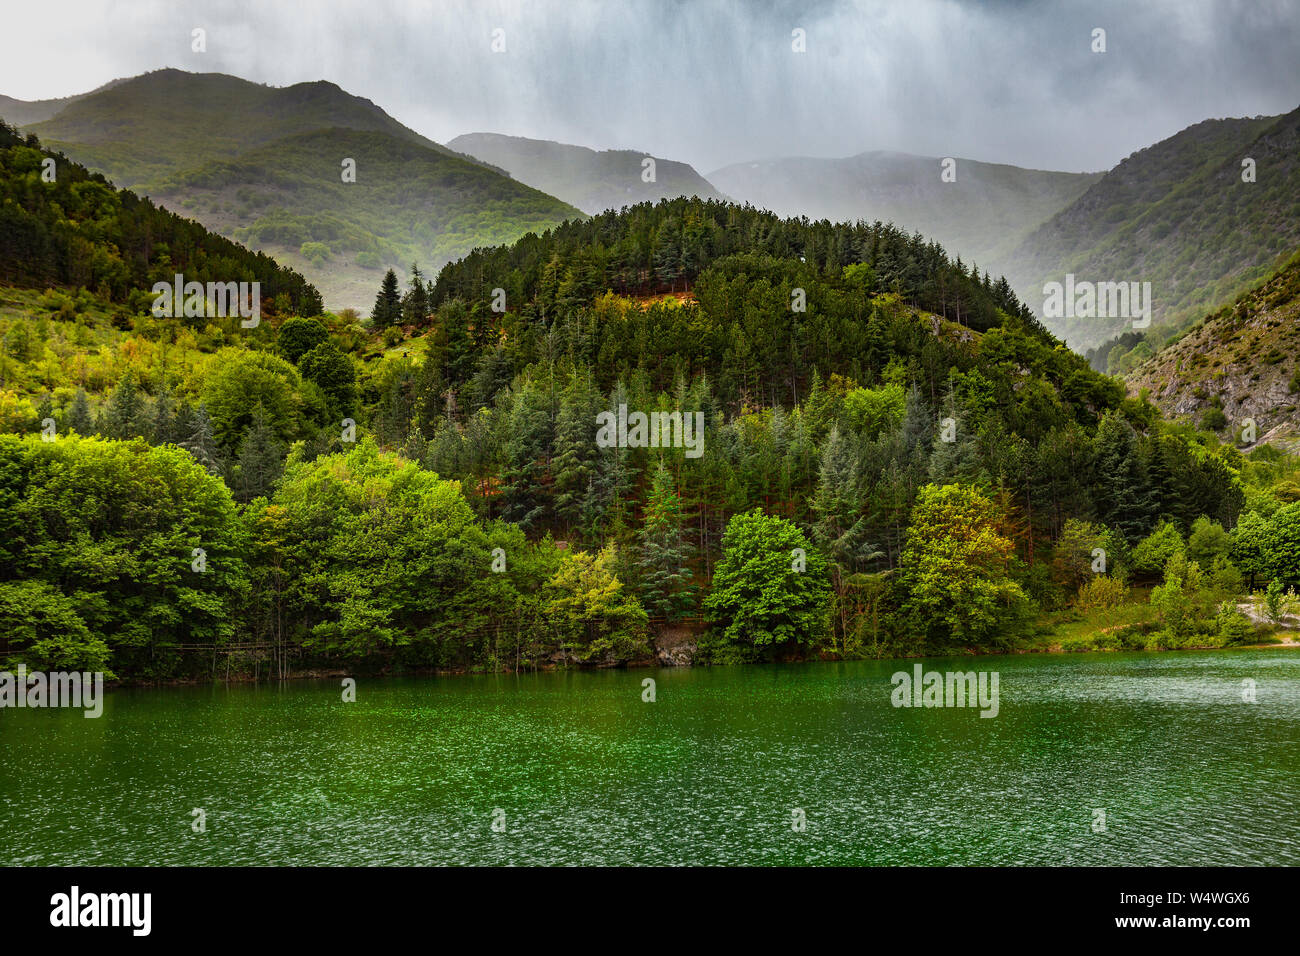 Rainy day on Lake San Domenico in the Sagittario Gorges Guided Nature Reserve. Villalago, Province of L'Aquila, Abruzo, Italy, Europe Stock Photo